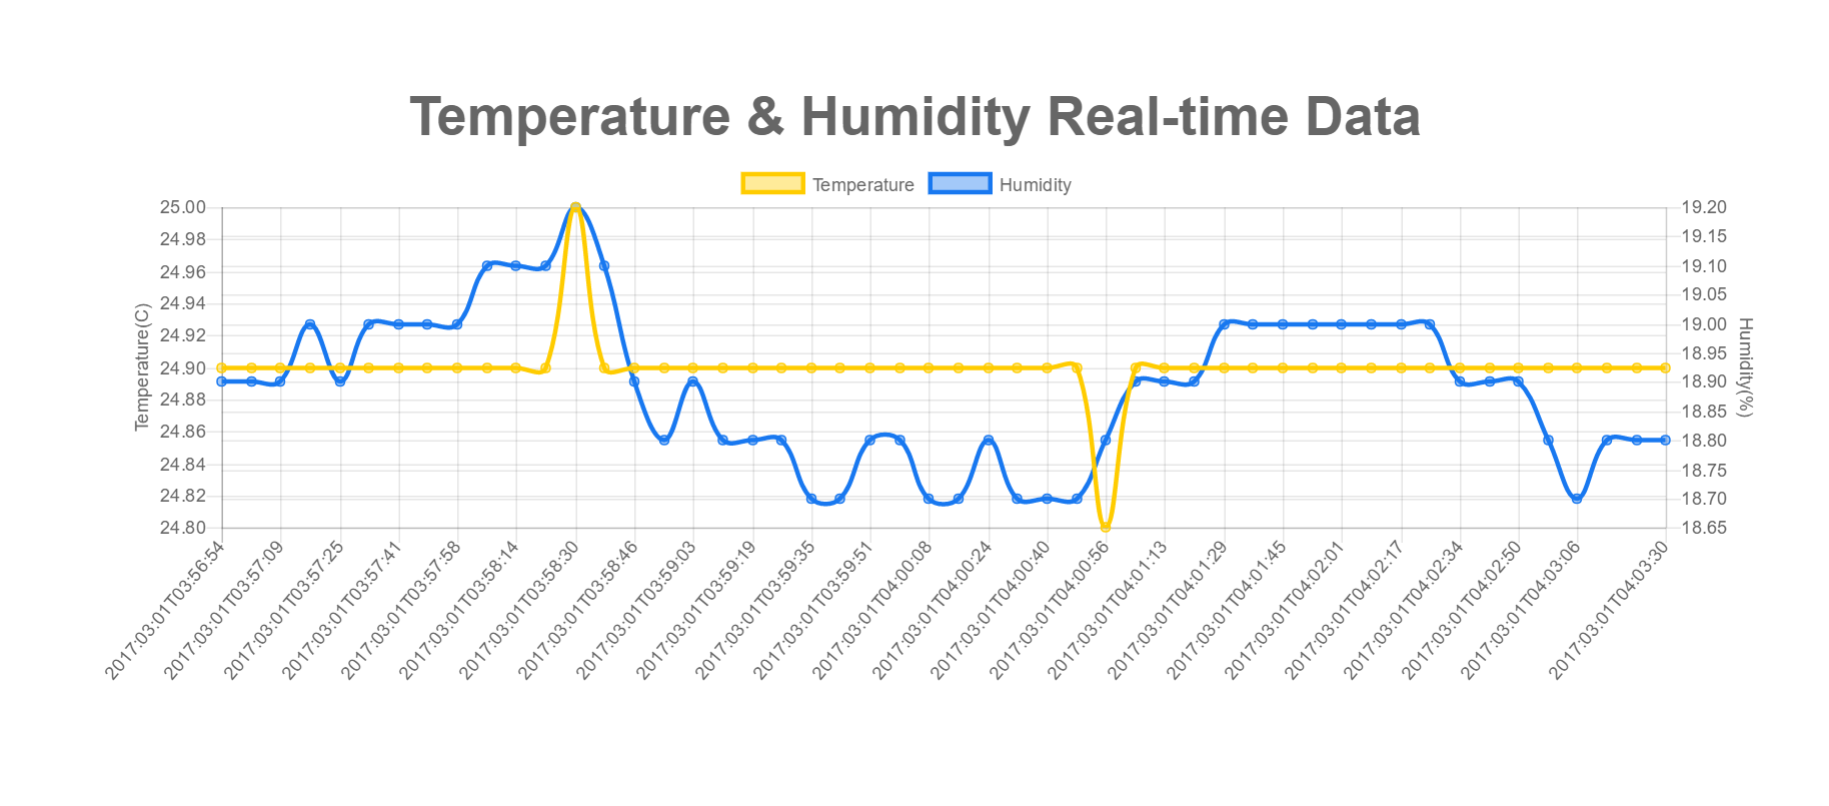 Azure web app page showing real-time temperature and humidity